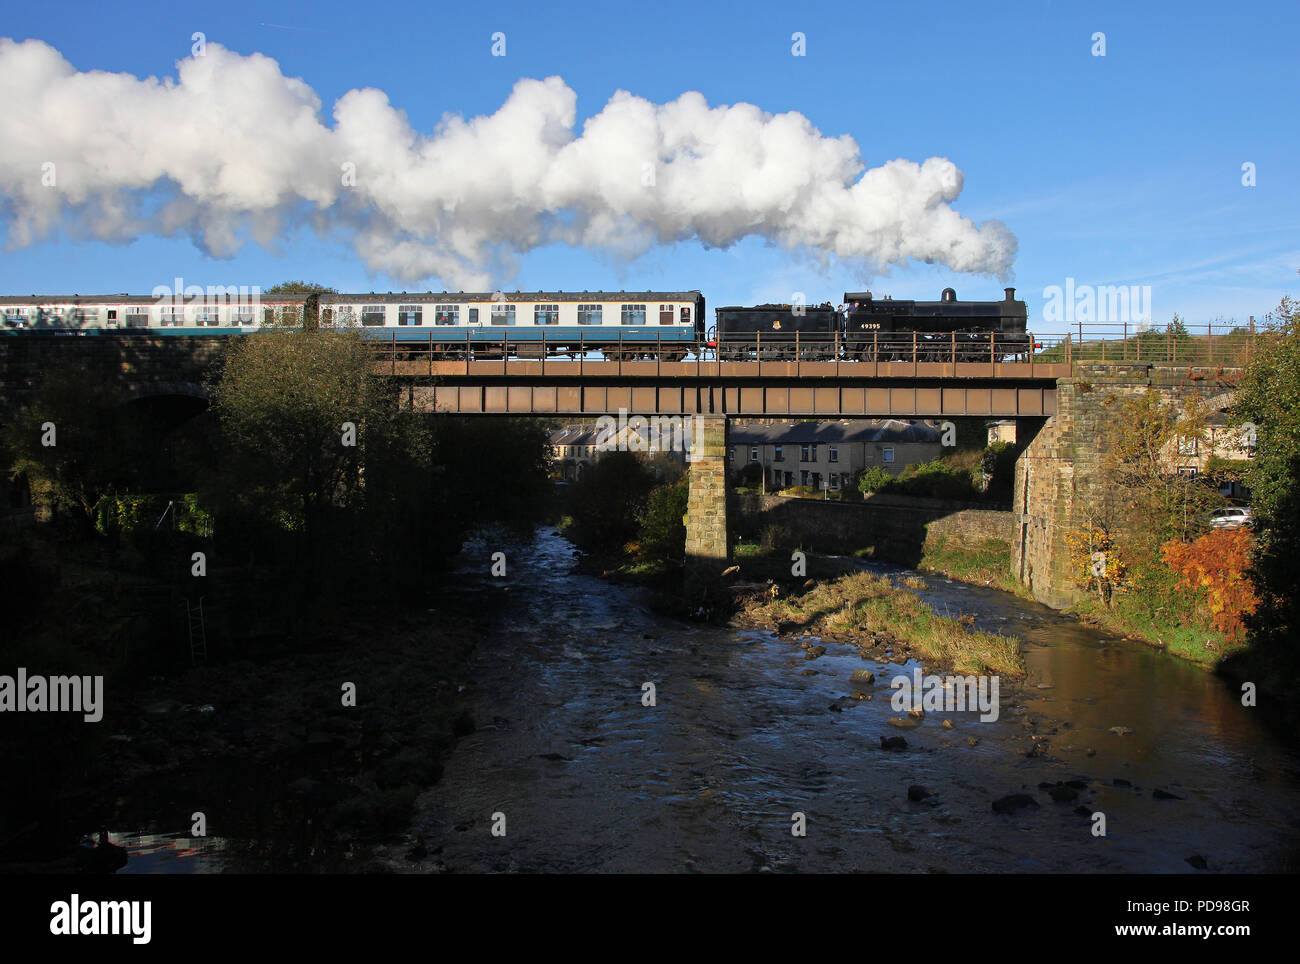 Super D 49395 heads over Brooksbottom Viaduct on the East Lancs Railway. Stock Photo